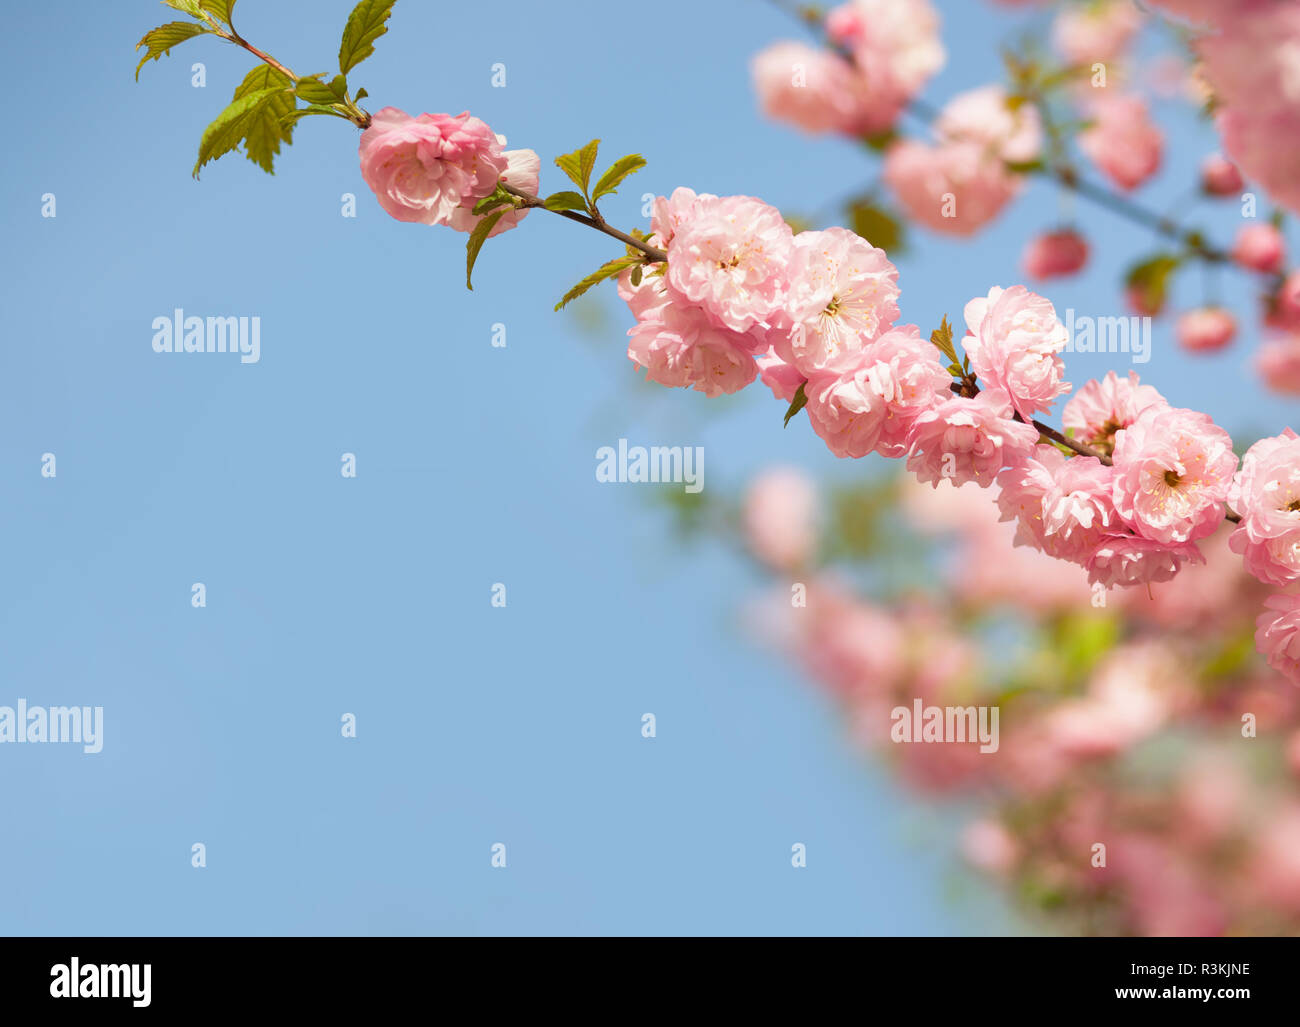 branches with beautiful pink flowers against the blue sky. Amygdalus triloba. Shallow DOF. Stock Photo